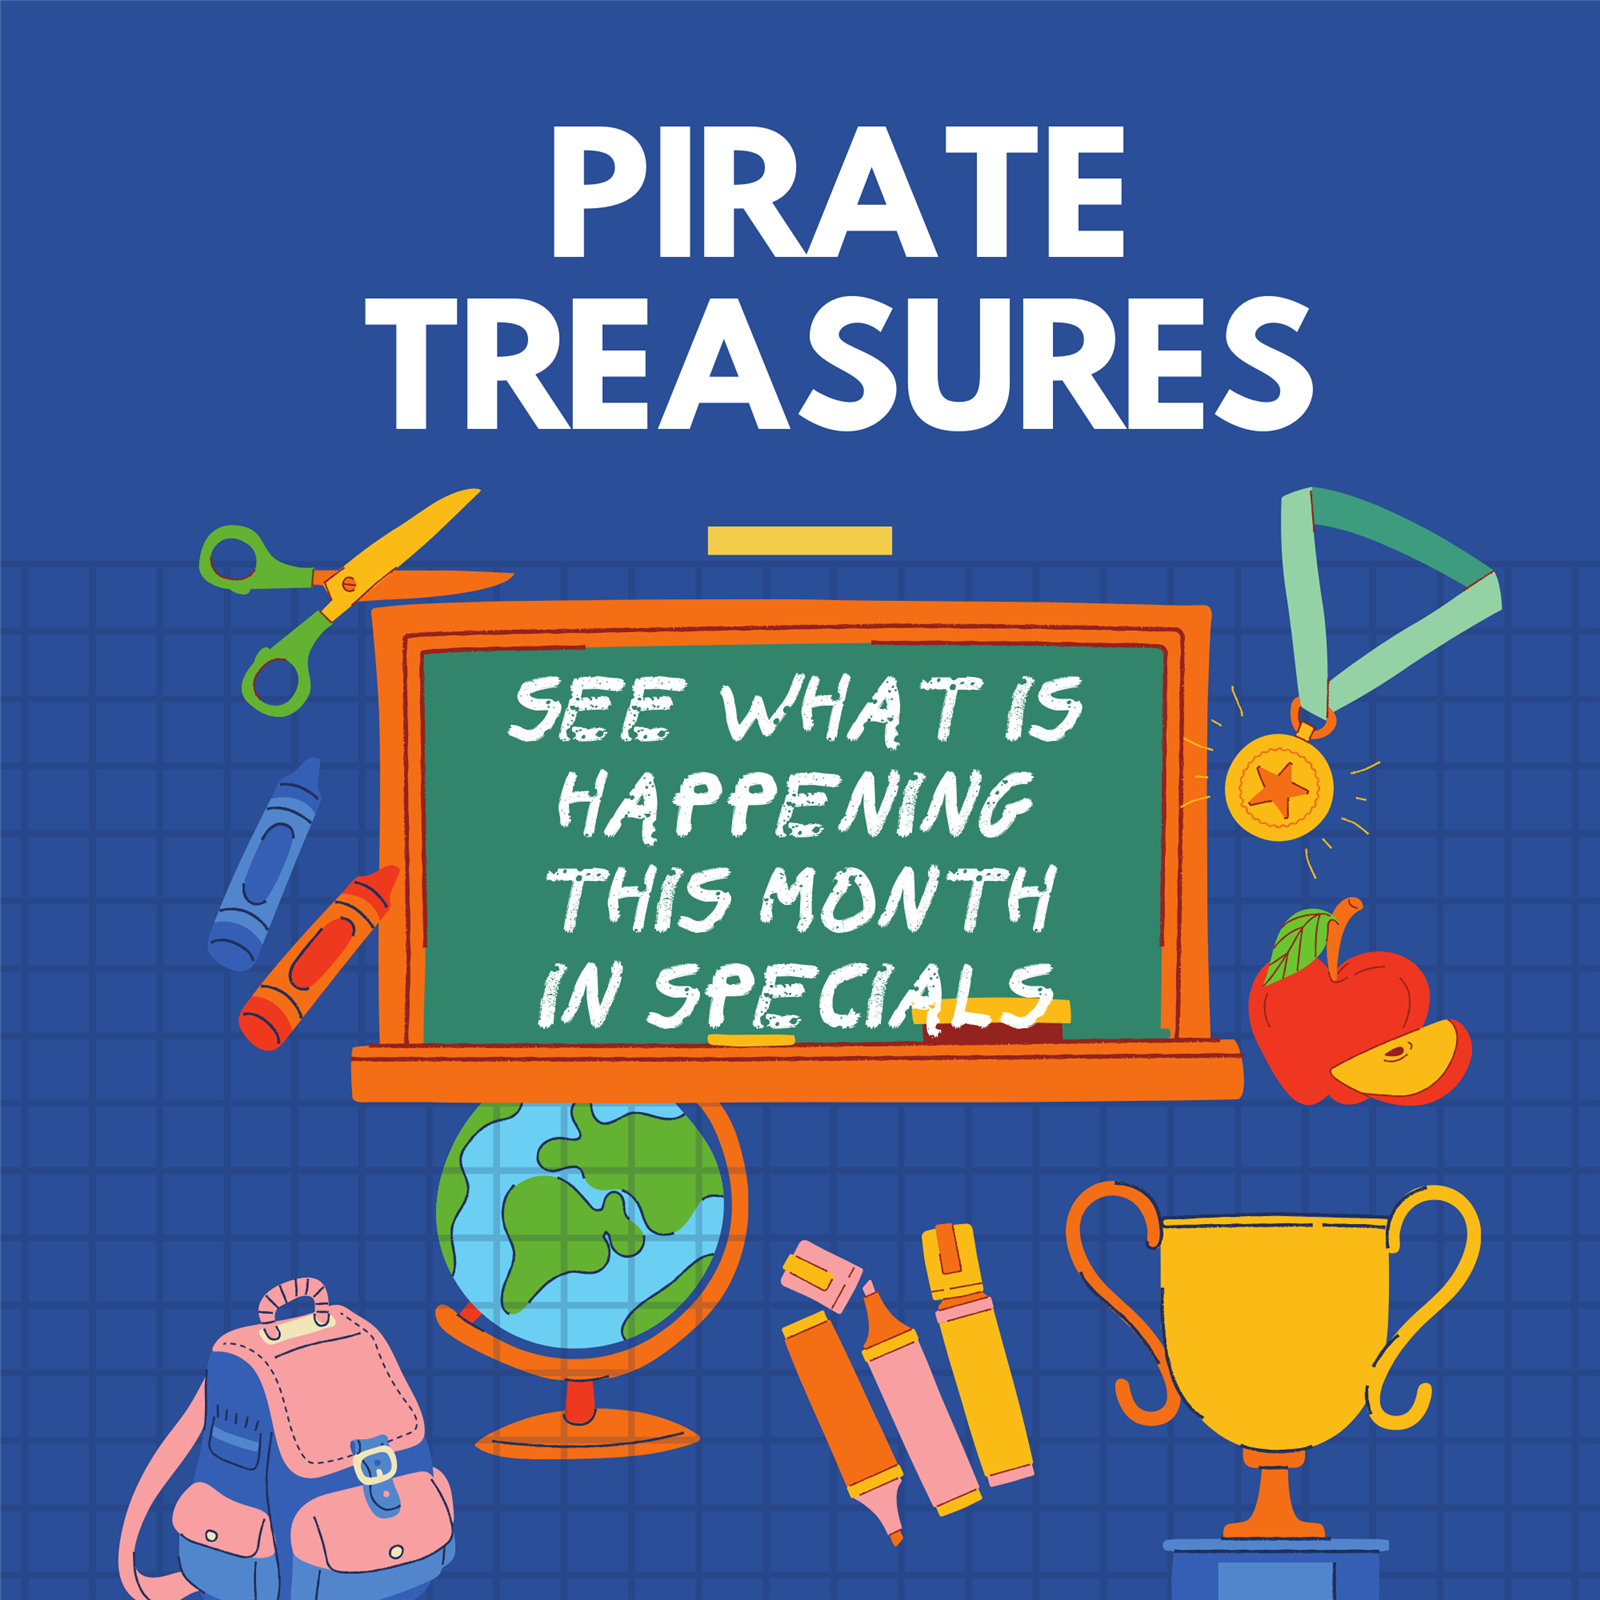  Pirate Treasures Monthly Newsletter